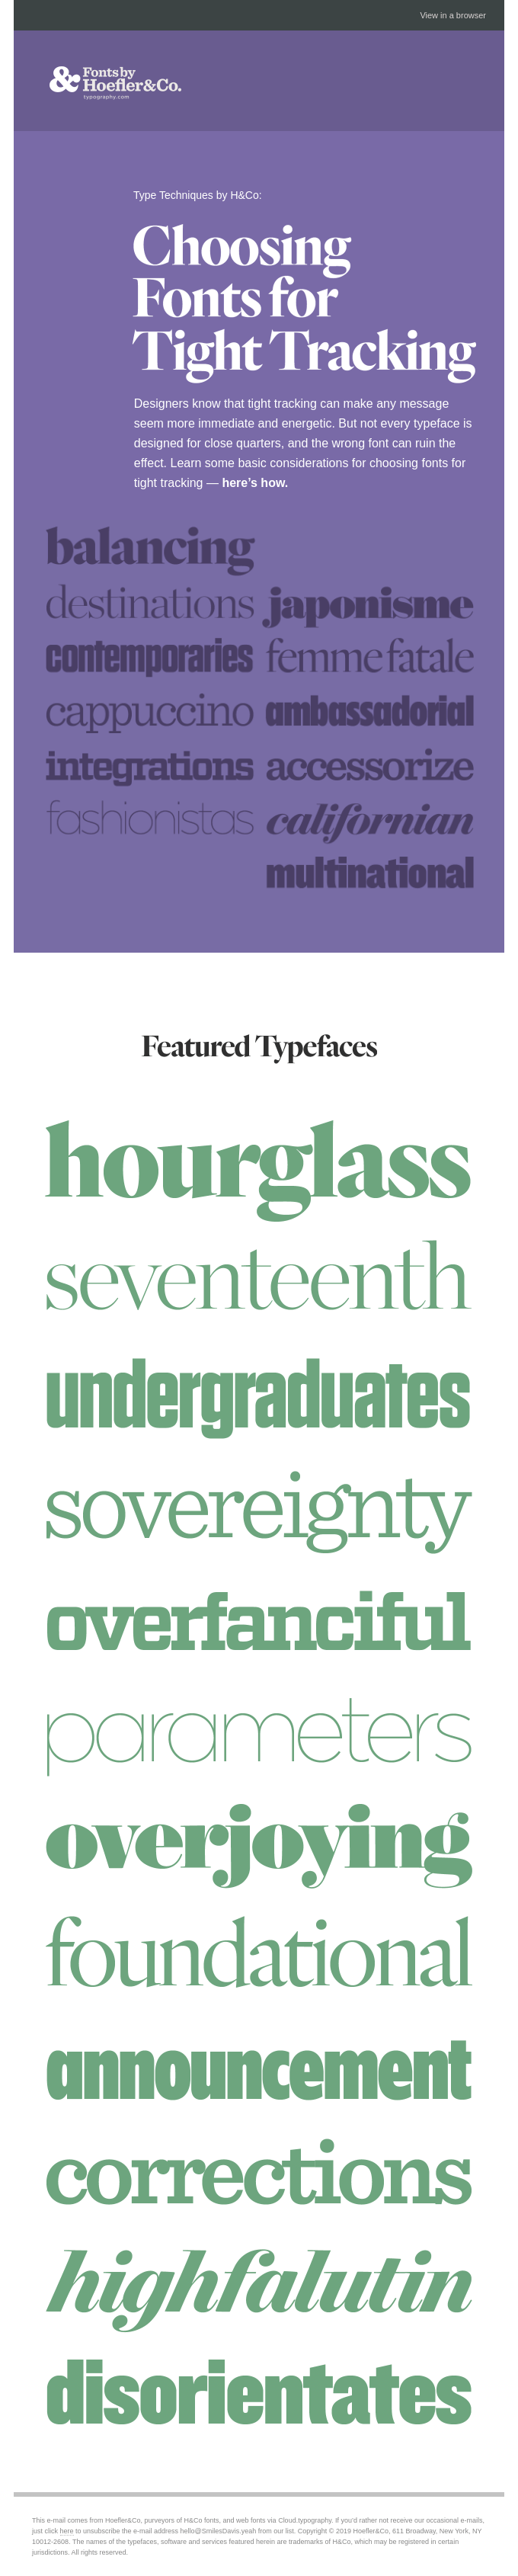 Monochrome Email Inspiration- Hoefler and Co.